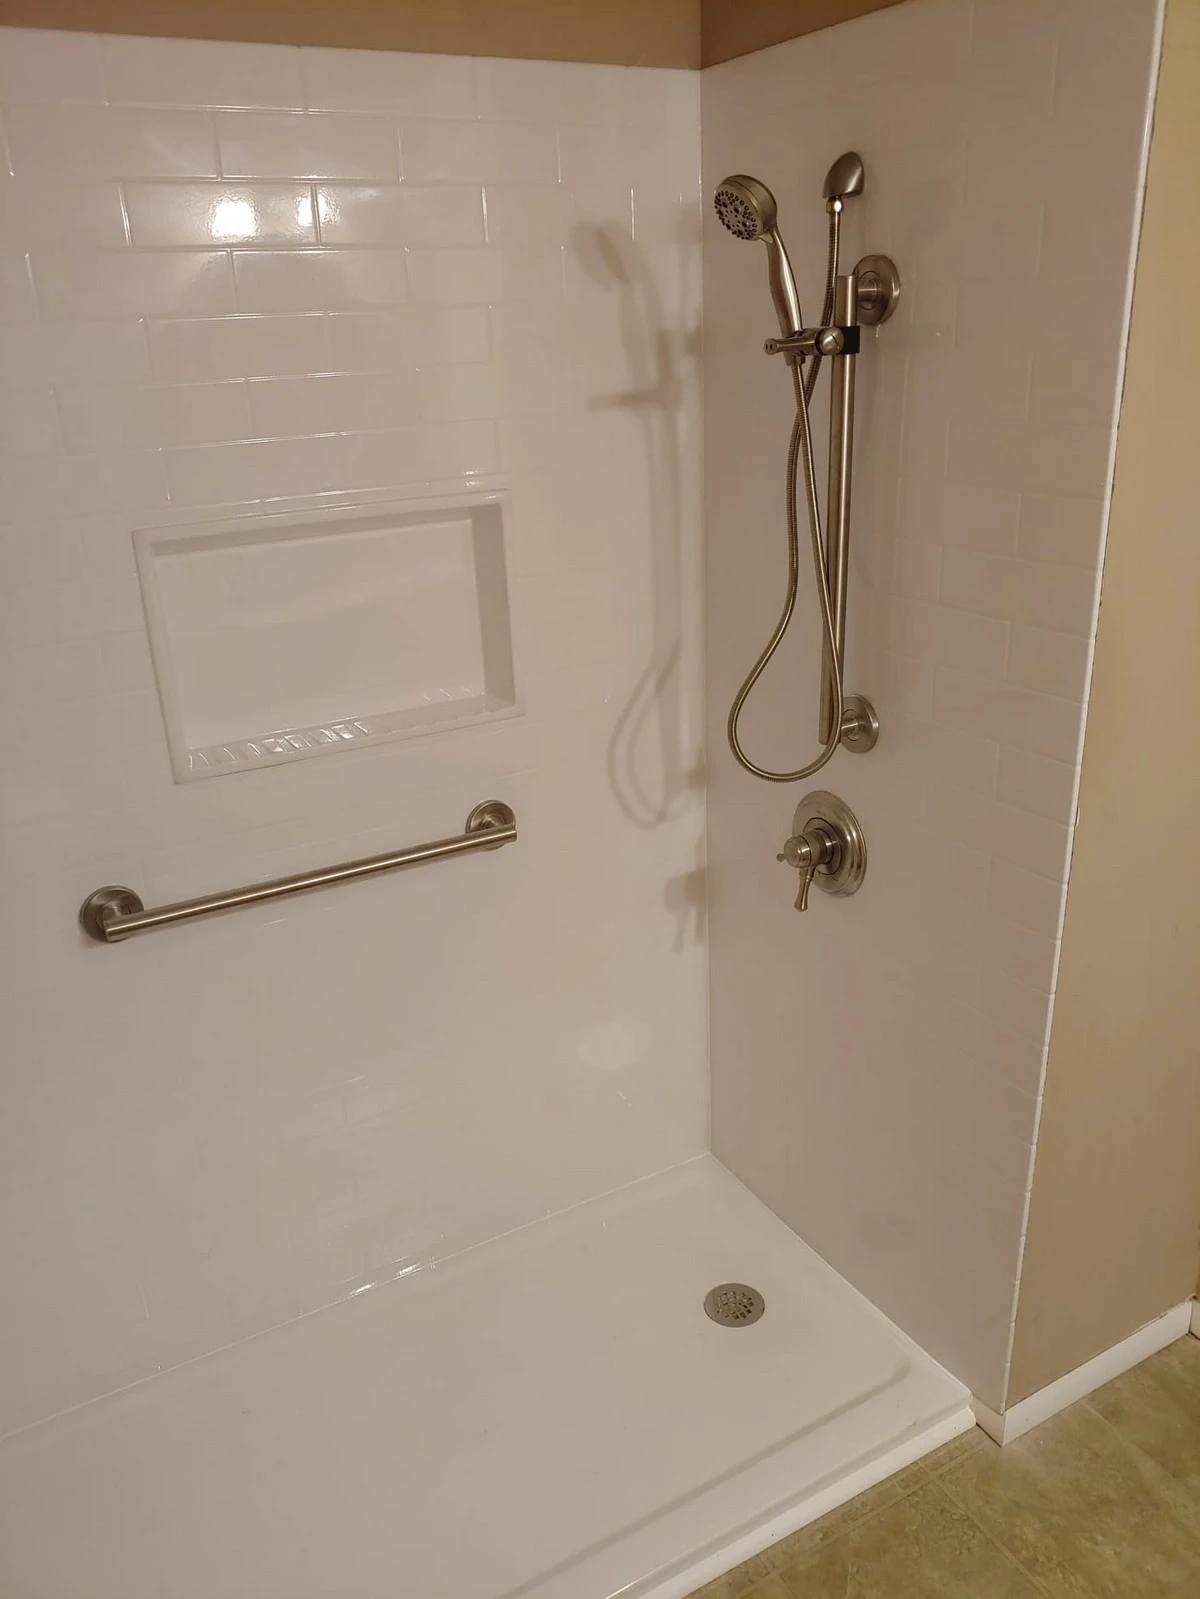 Where to Locate Grab Bars in Shower - Mr. Grab Bar